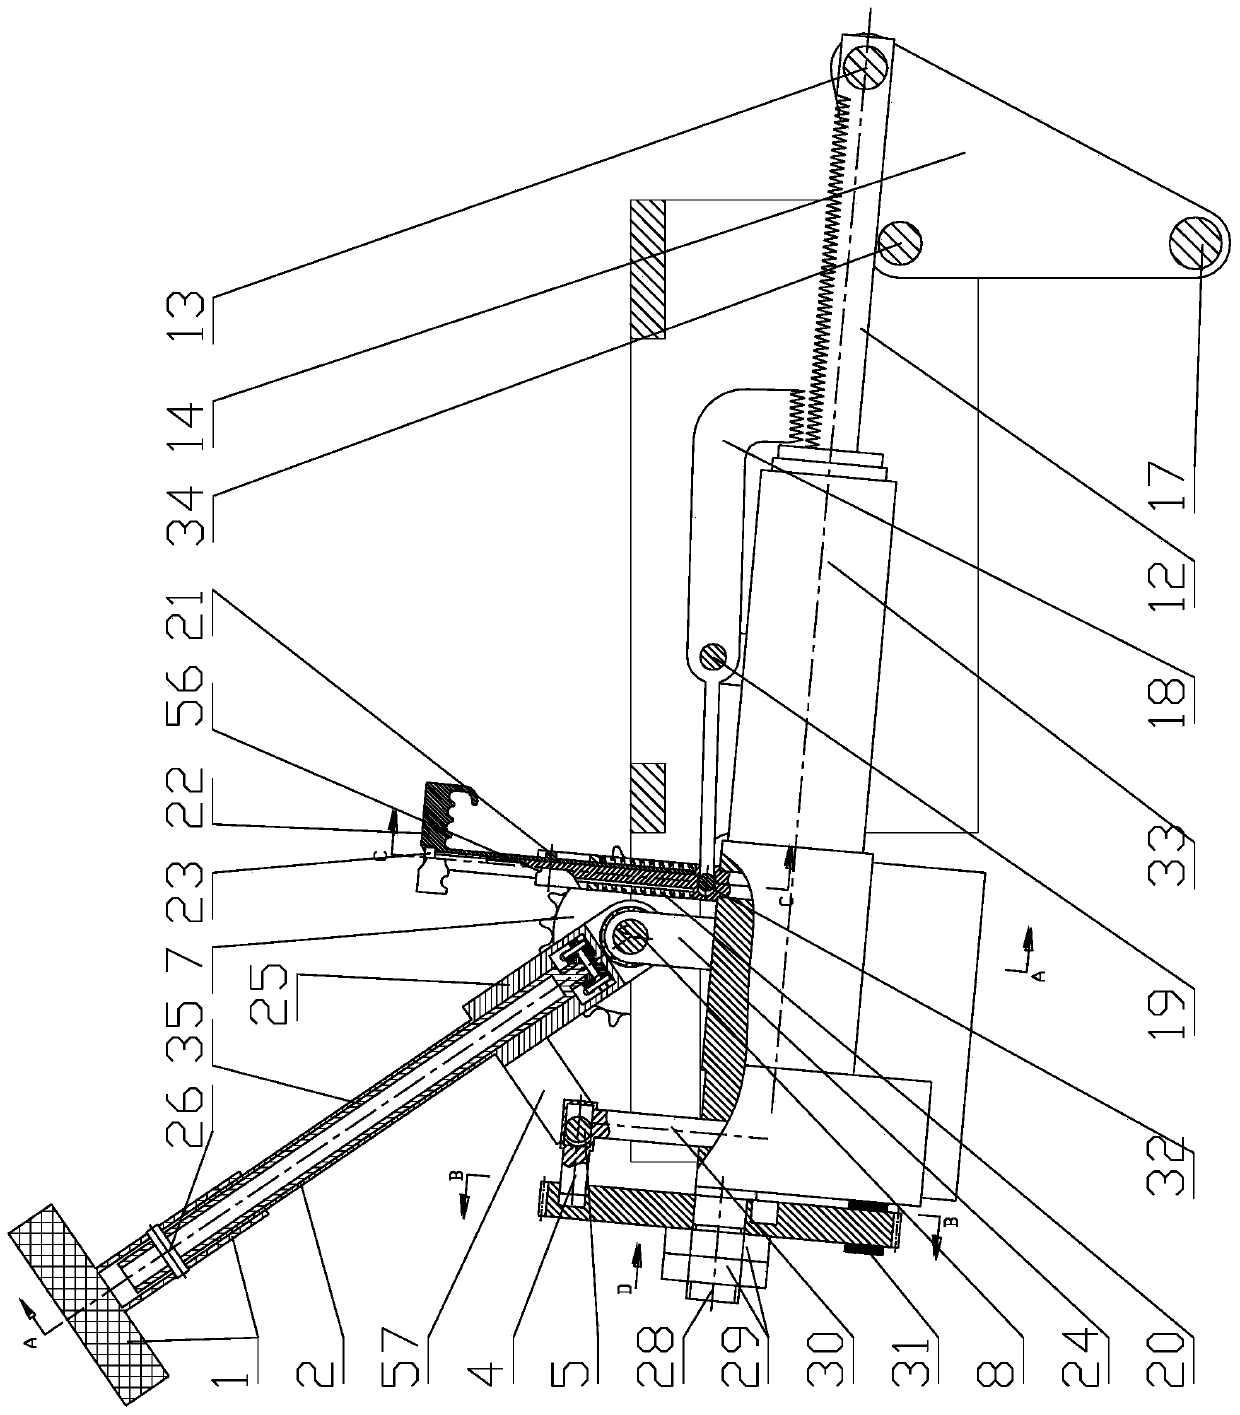 Manual and electric dual-purpose omni-directional moving opposite-wheel control mechanism of carrier mobile equipment